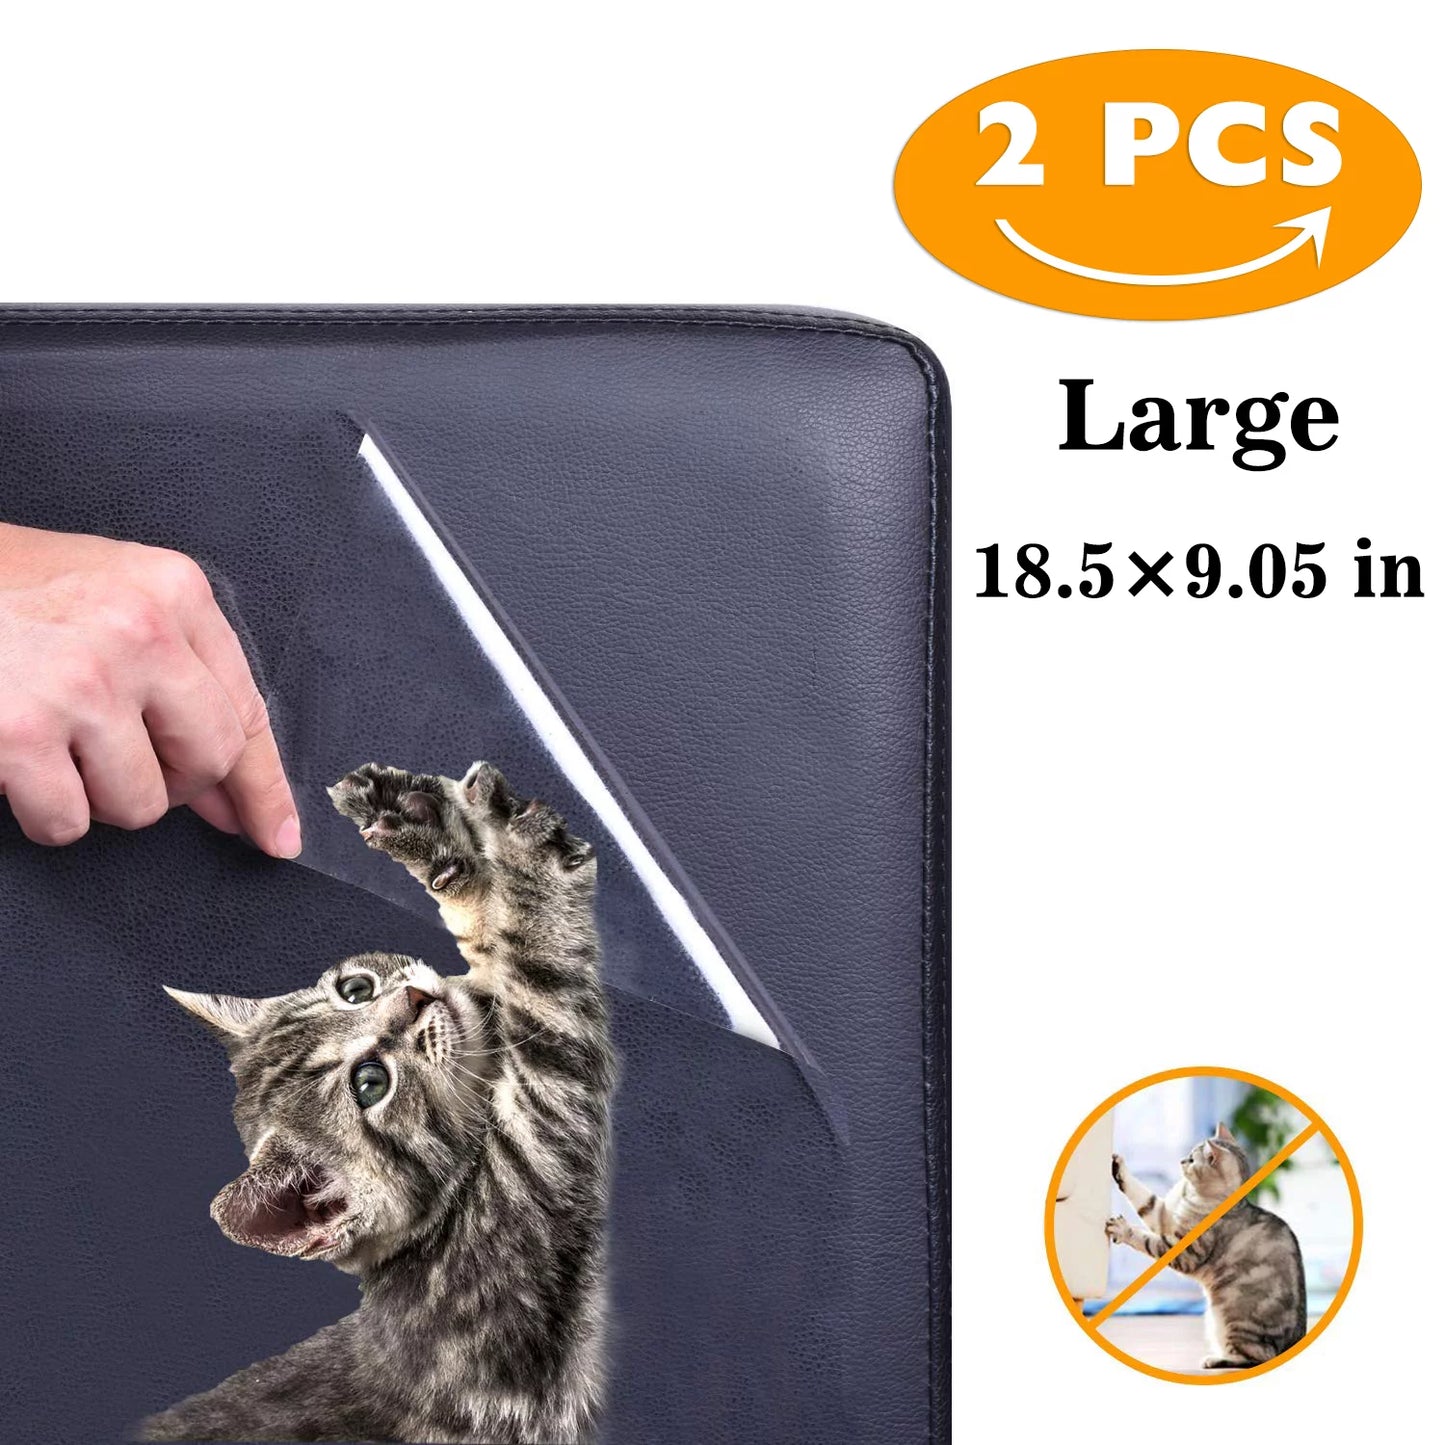 New Upgrade - Large (18.5 X9.05Inch) Furniture Defender Cat Scratching Guard, Furniture Protectors from Pets, anti Cat Scratch Deterrent, Claw Proof Pads for Door(2Pcs/Set)